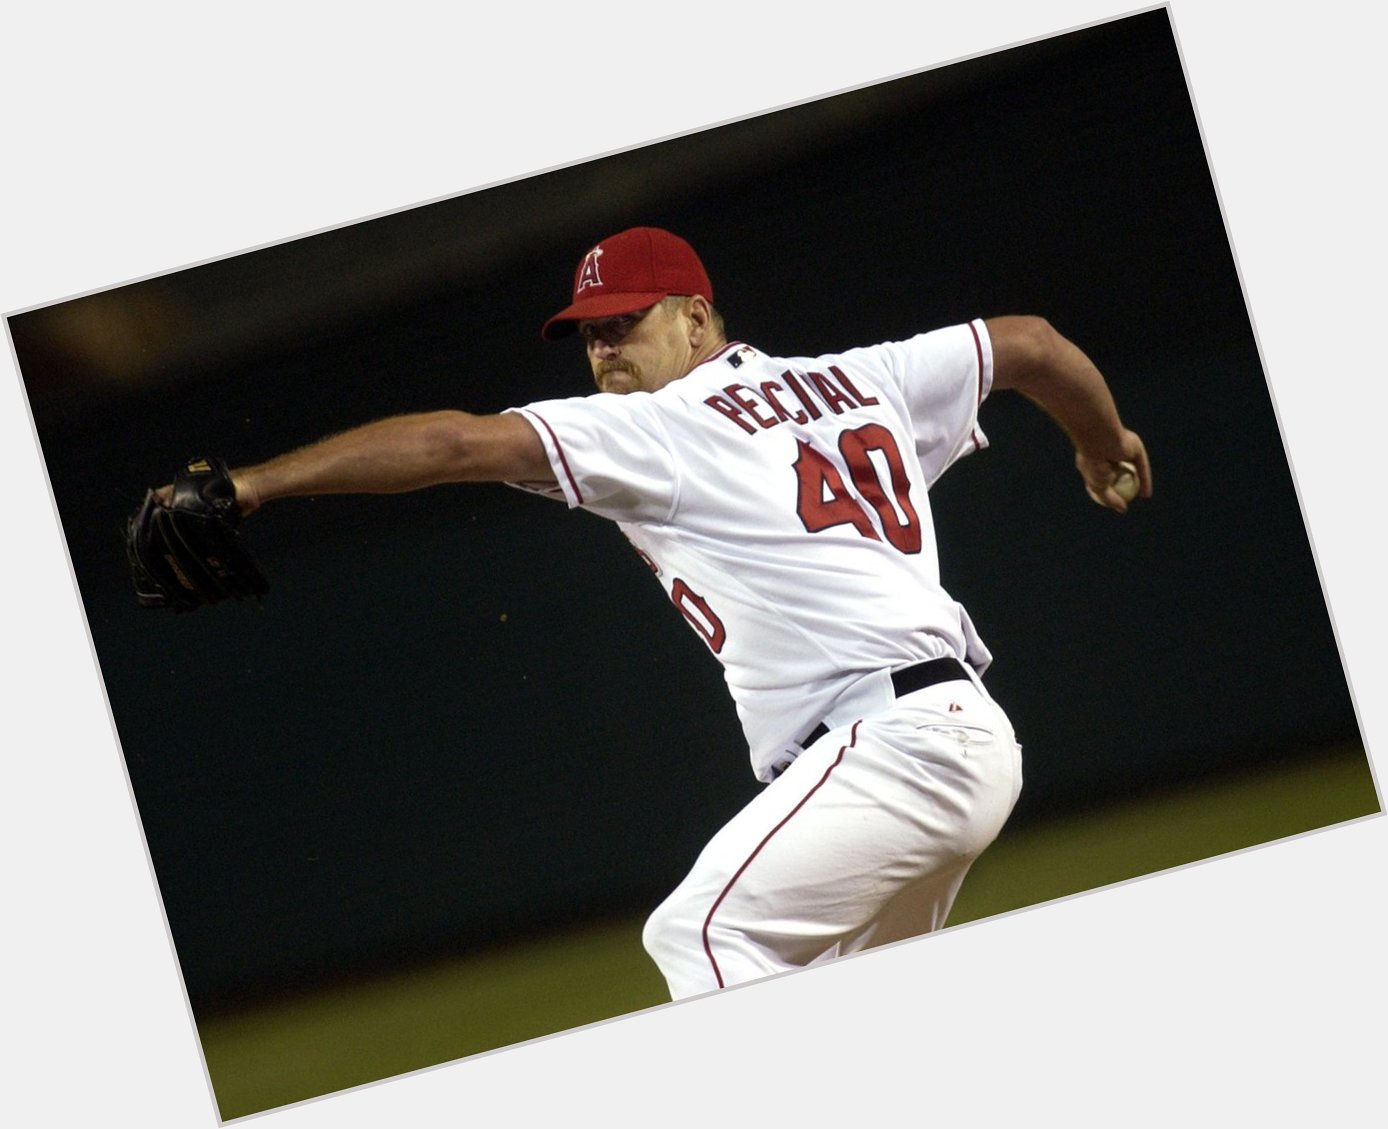 Happy Birthday to Troy Percival, who racked up 358 saves and won a World Series with in 2002 